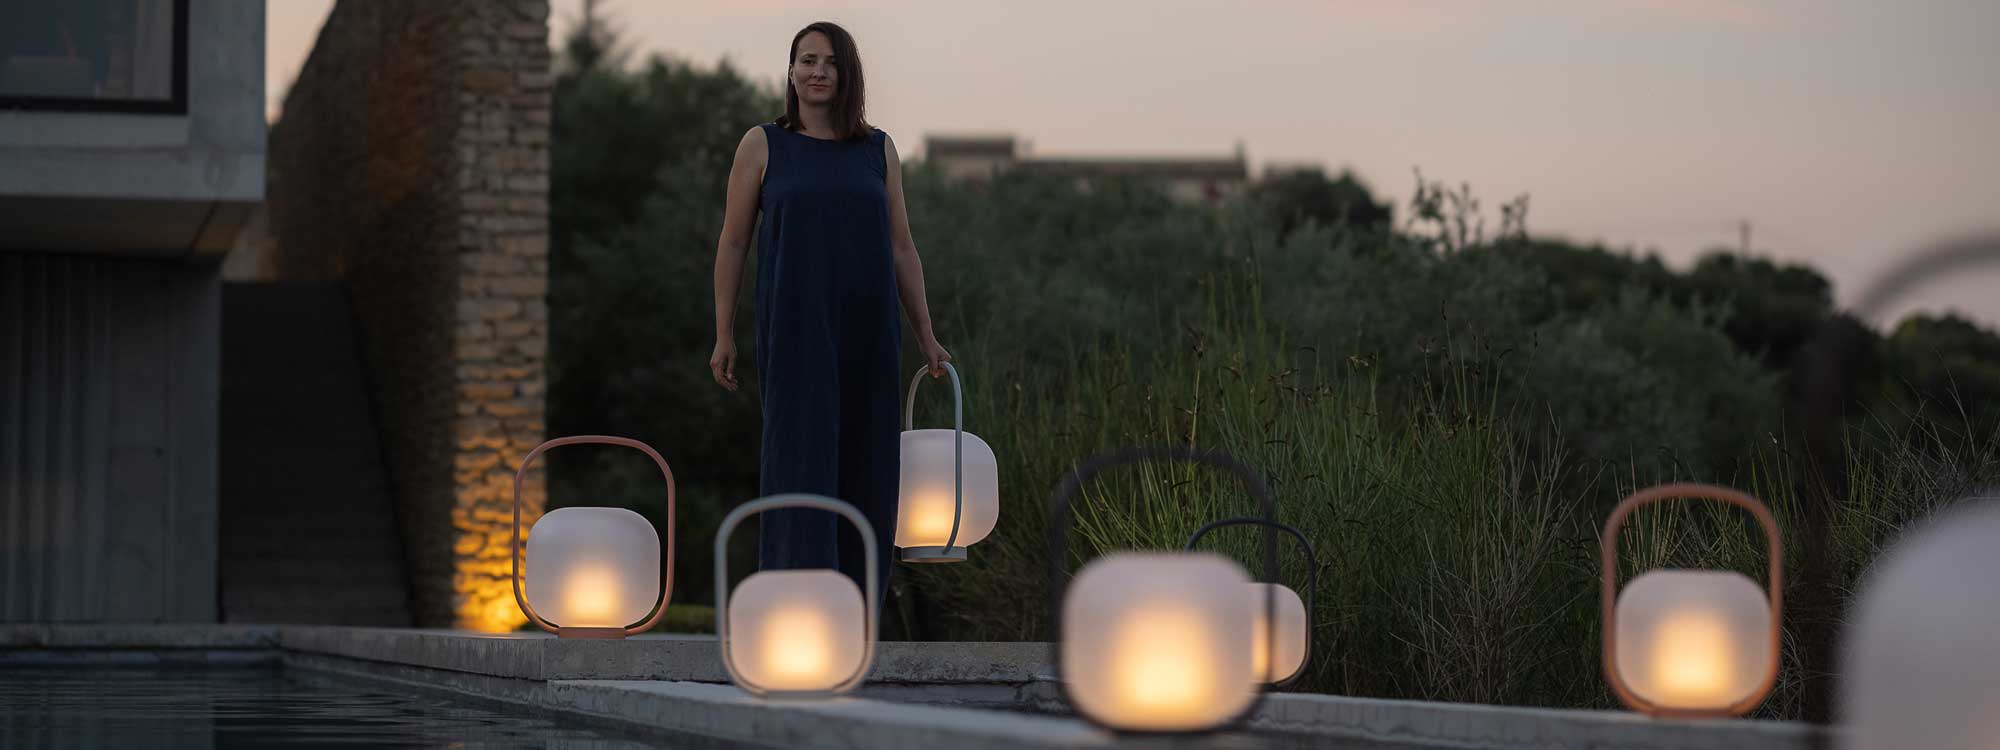 Image at dusk of woman walking along terrace with Otus LED garden lantern, with other lanterns surrounding her on the floor